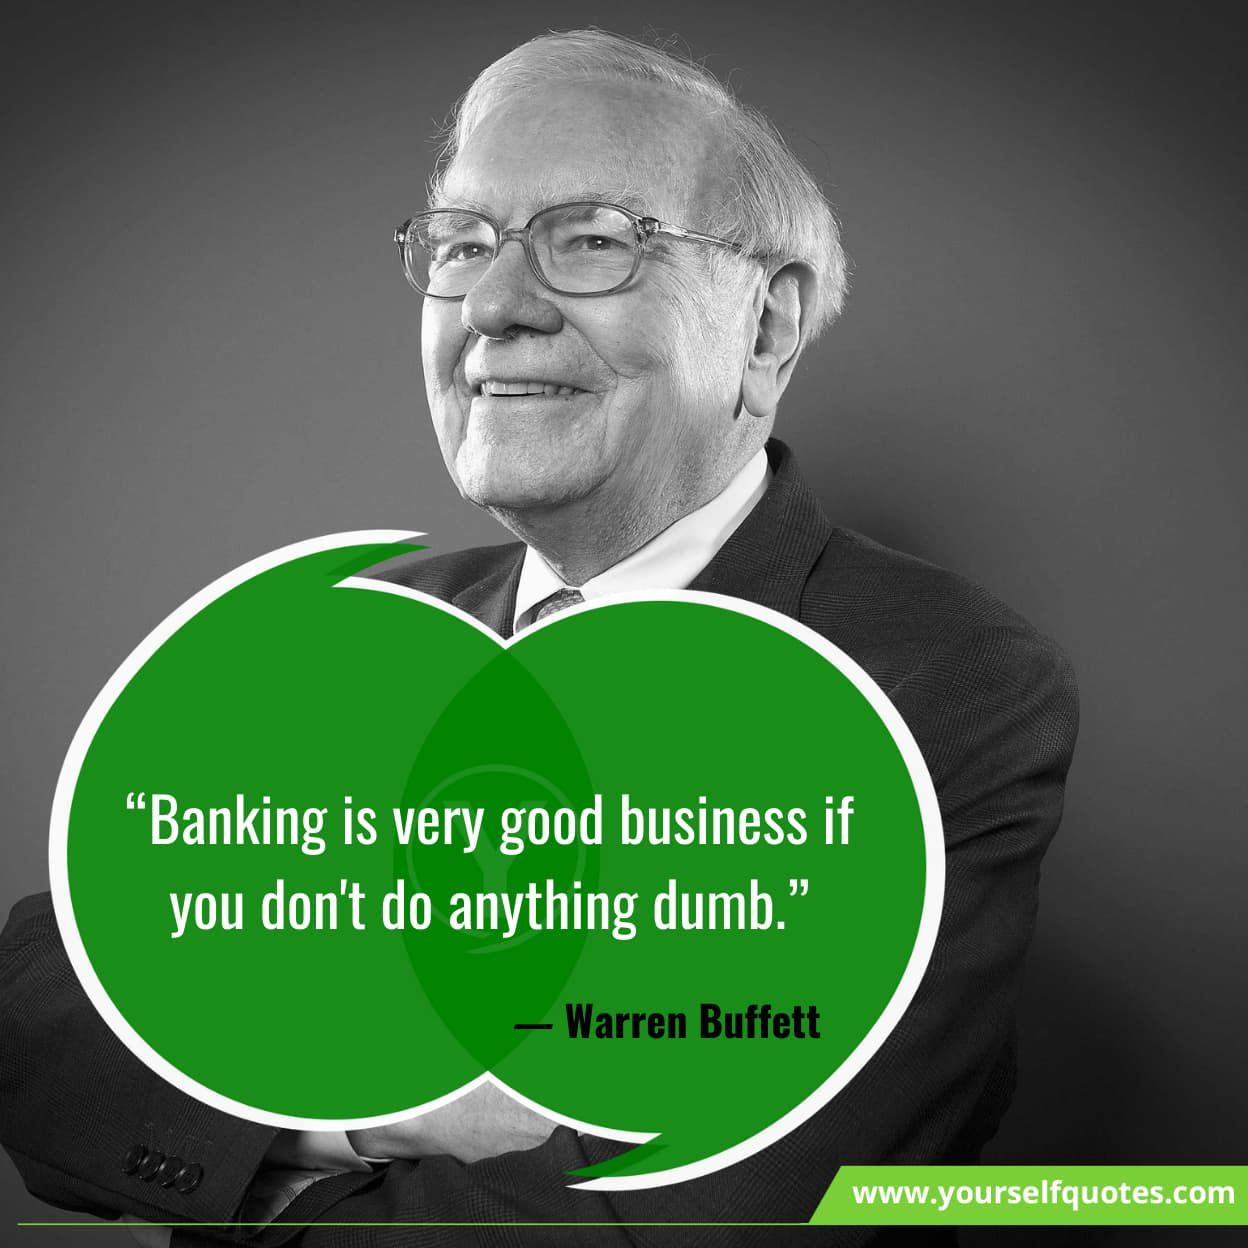 Inspirational Banking Quotes